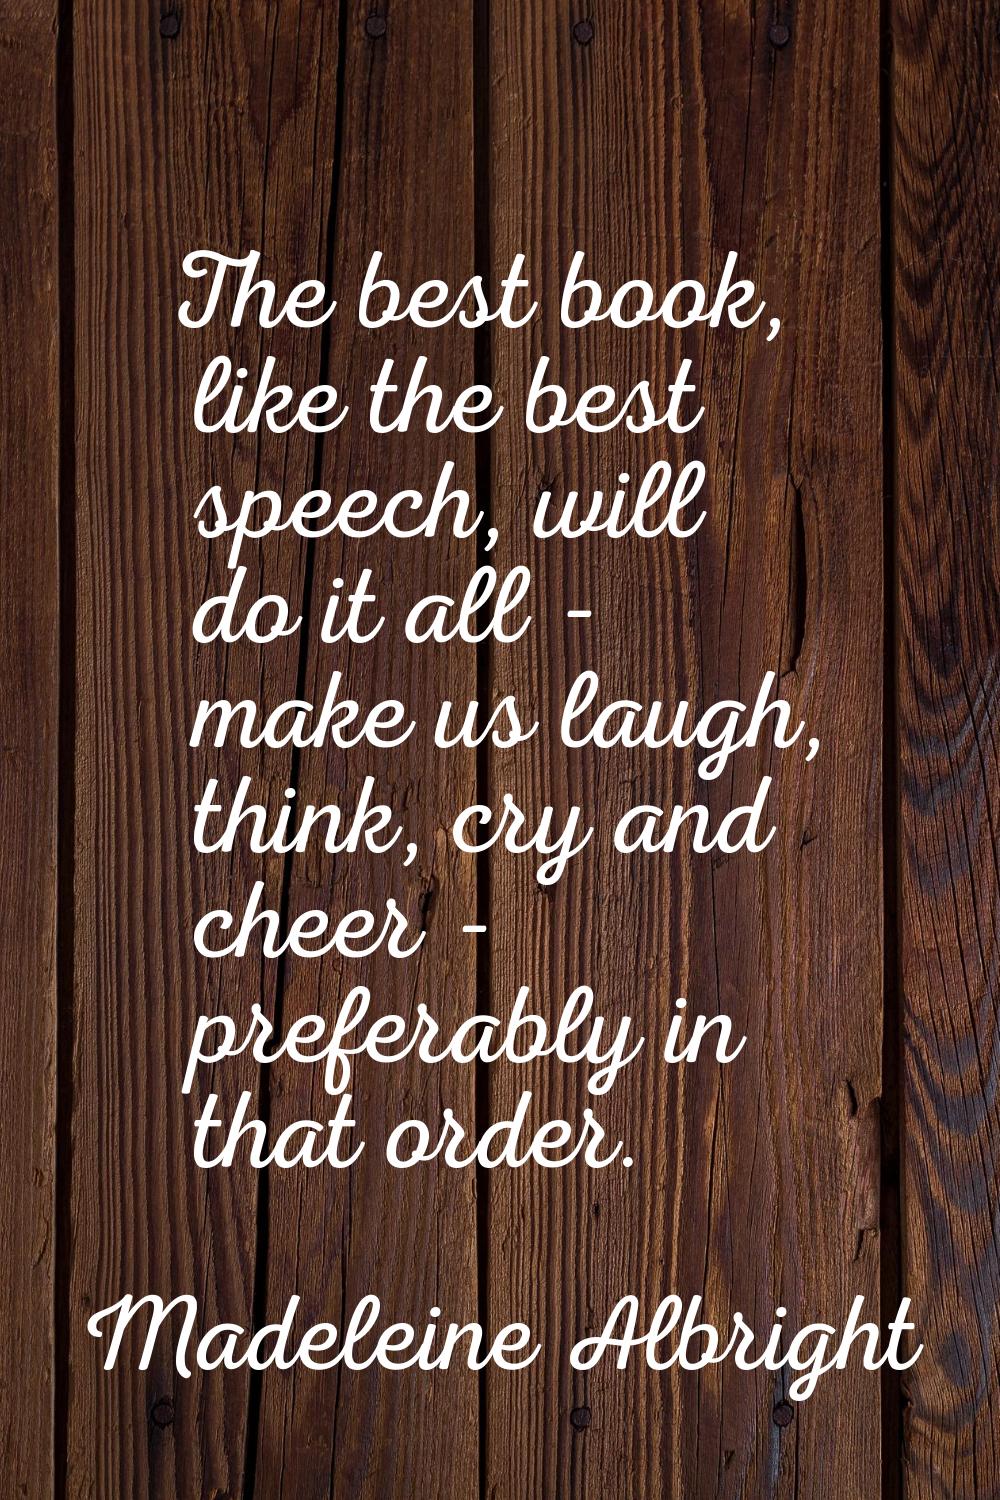 The best book, like the best speech, will do it all - make us laugh, think, cry and cheer - prefera